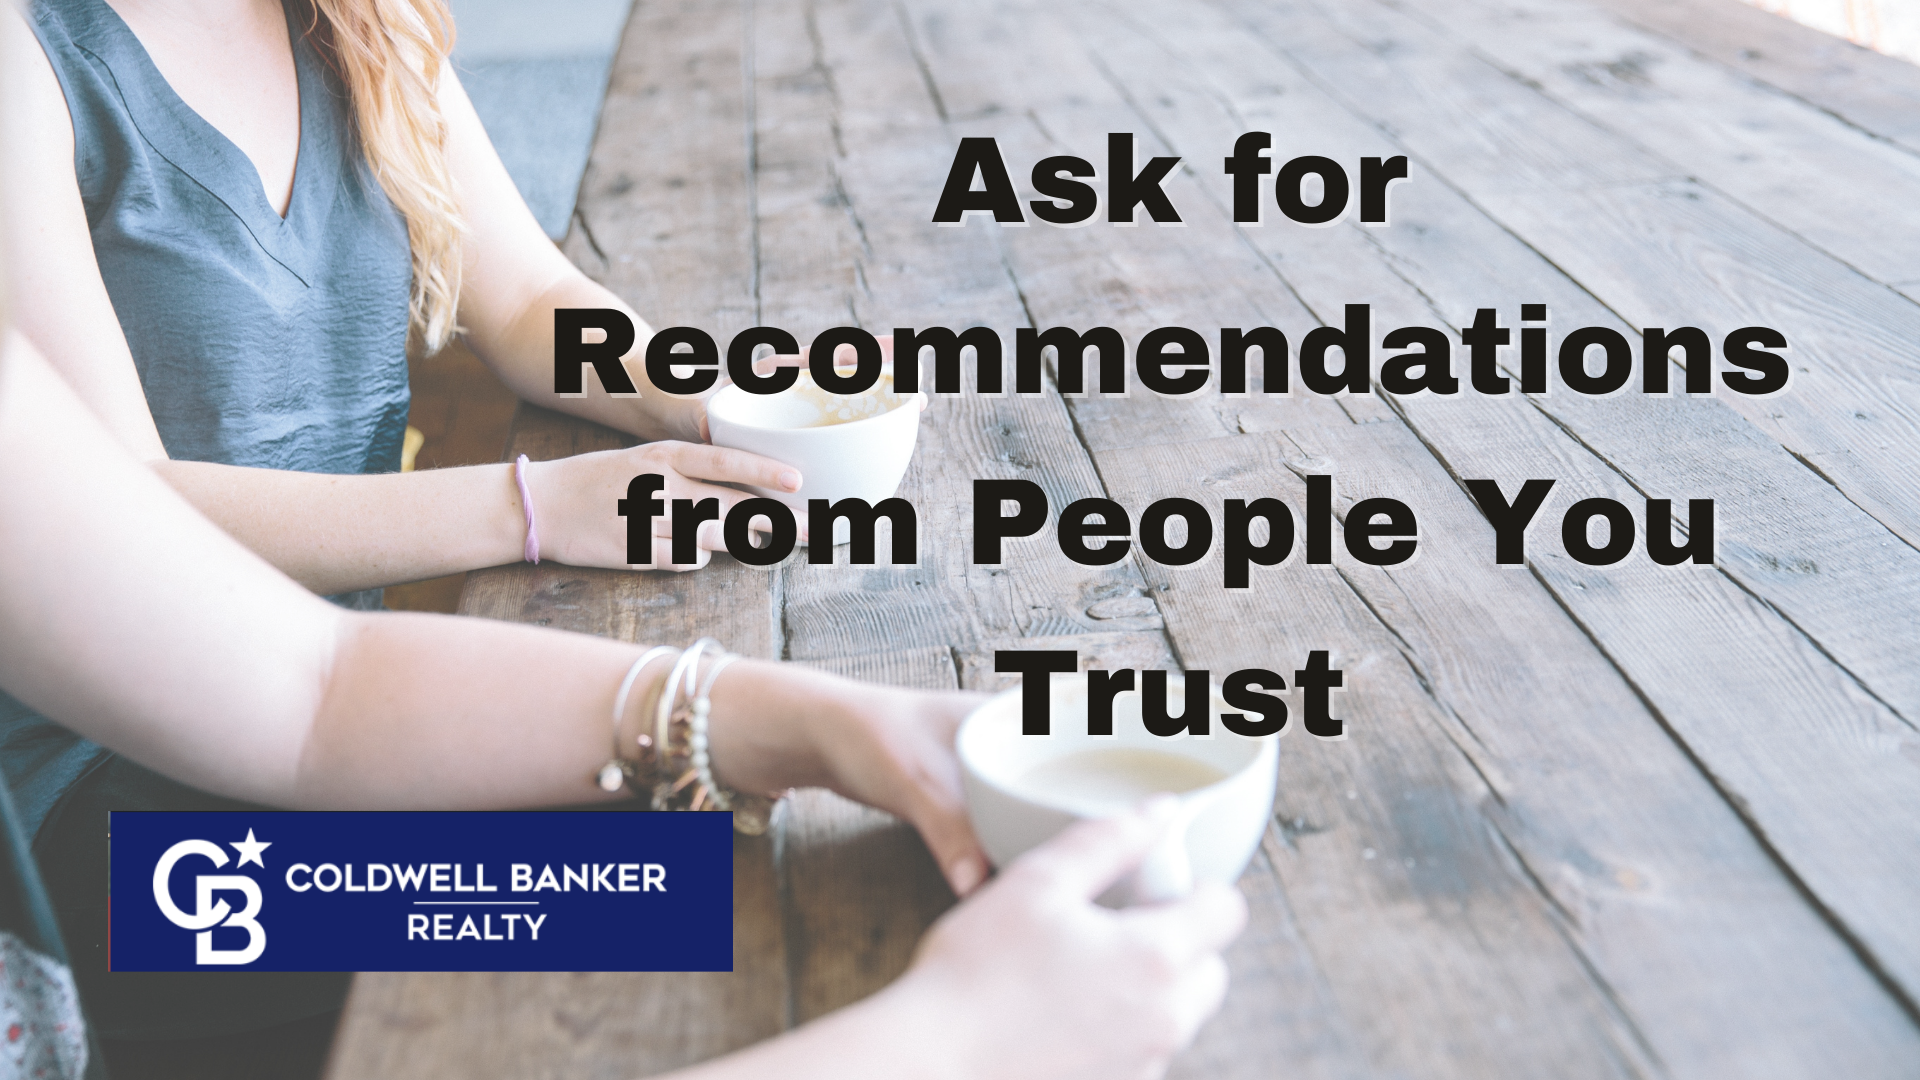  Ask for recommendations from people you trust